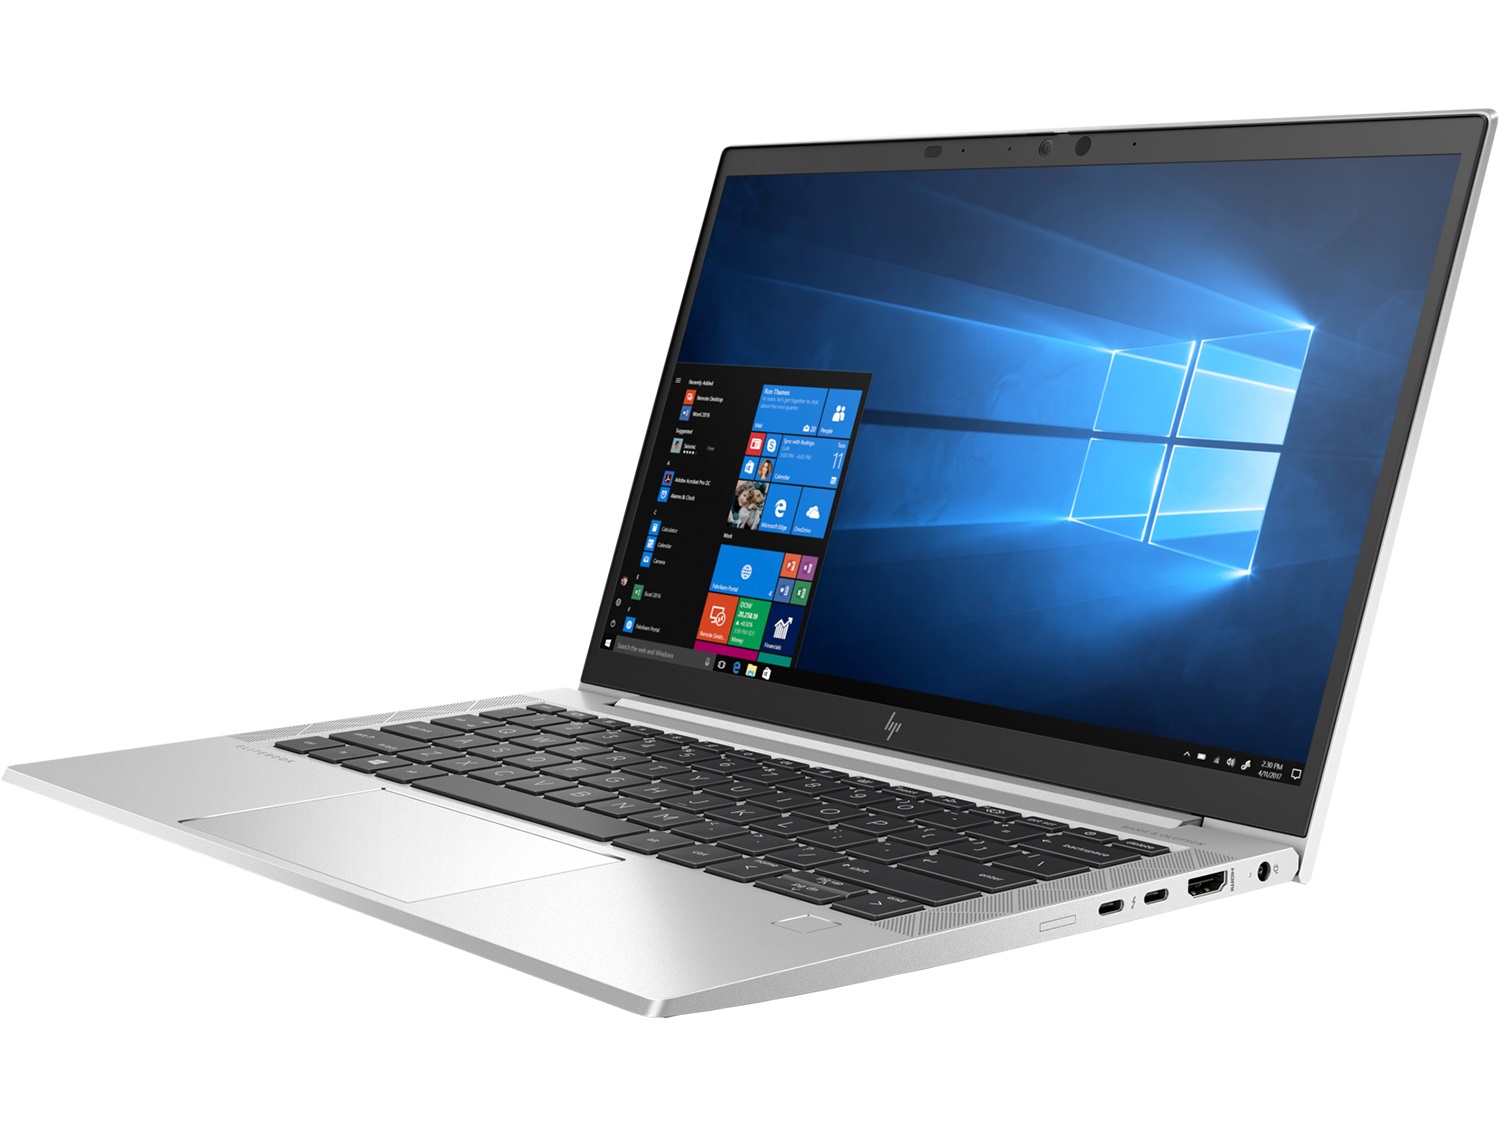 HP EliteBook 830 G7 is smaller and lighter than its predecessors. It is  considered one of the best mainstream Business laptops at an…